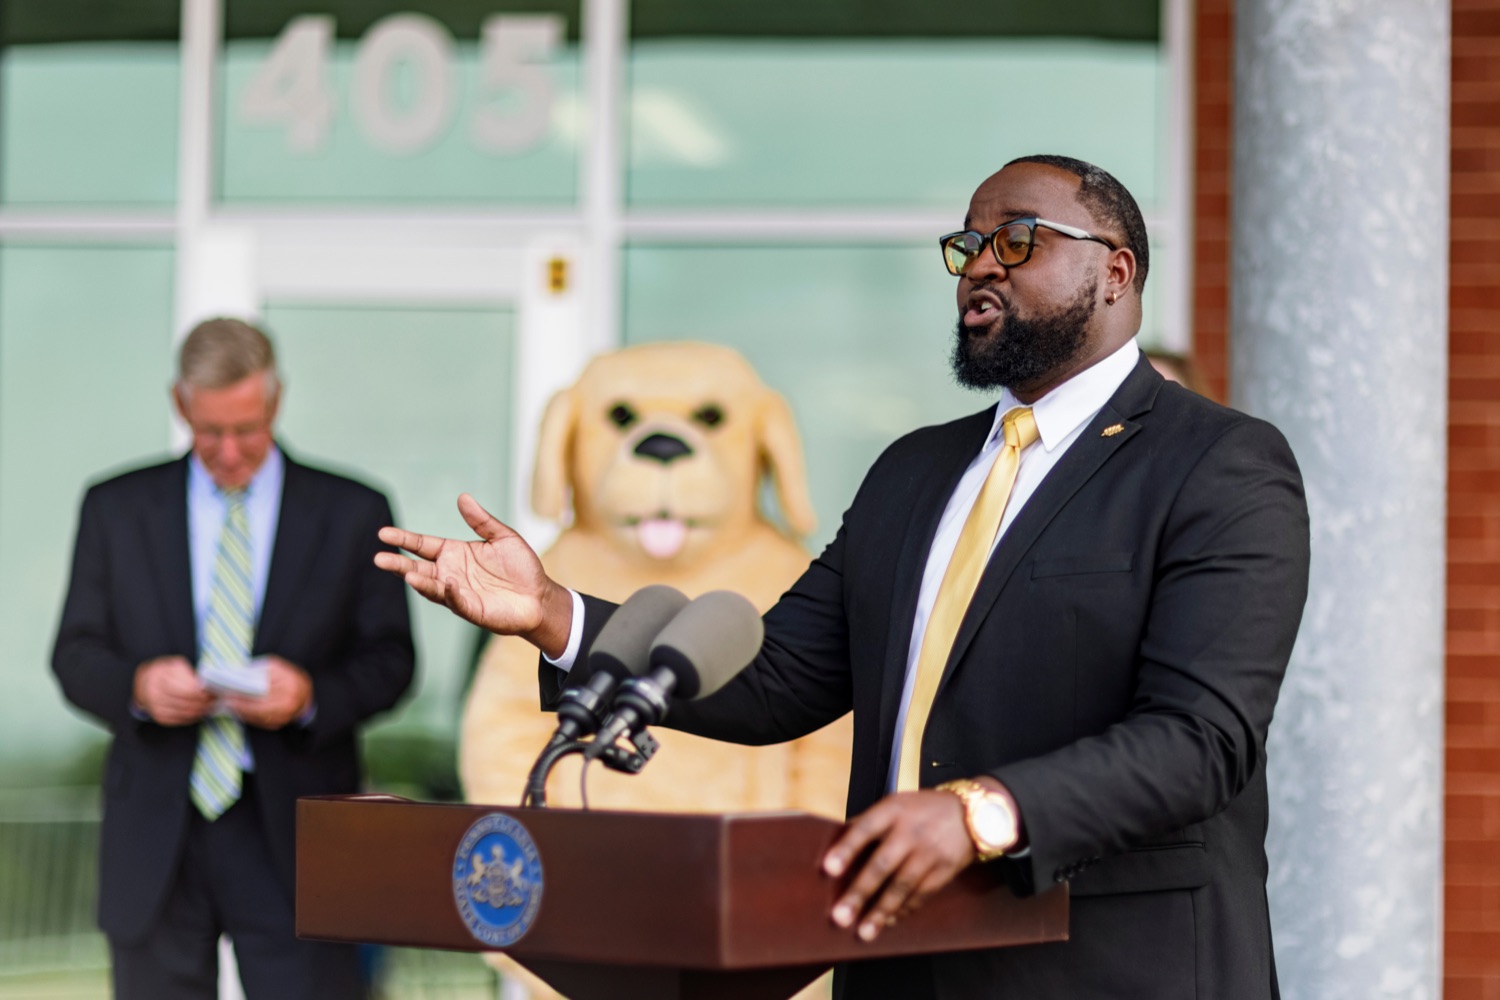 Stephon Fitzpatrick, executive director of Pennsylvania commission for Agriculture Education Excellence, speaks during a press conference, which highlighted the success of Pennsylvania's farm to school programs, at Hill Top Academy in Mechanicsburg on Friday, August 27, 2021.<br><a href="https://filesource.amperwave.net/commonwealthofpa/photo/19054_AGRIC_FarmToSchool_NK_014.jpg" target="_blank">⇣ Download Photo</a>